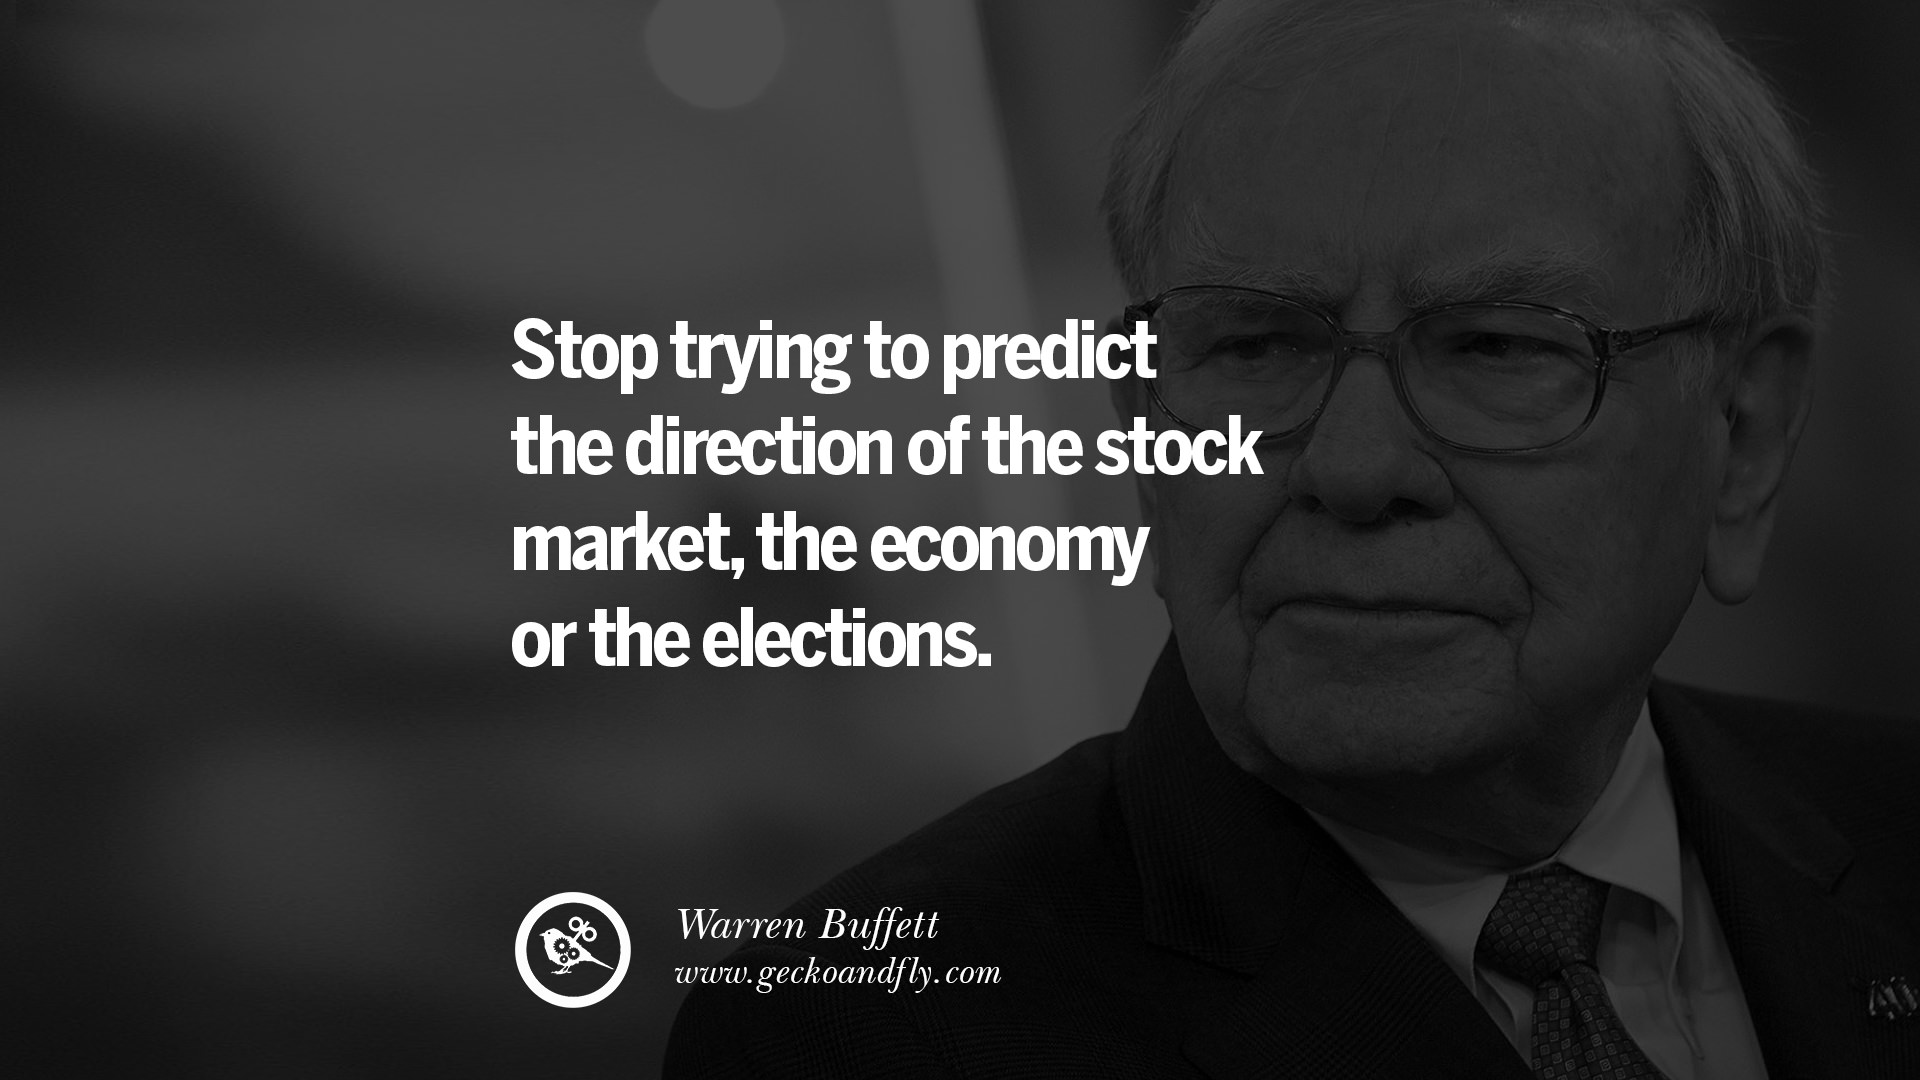 20 Inspiring Stock Market Investment Quotes by Successful